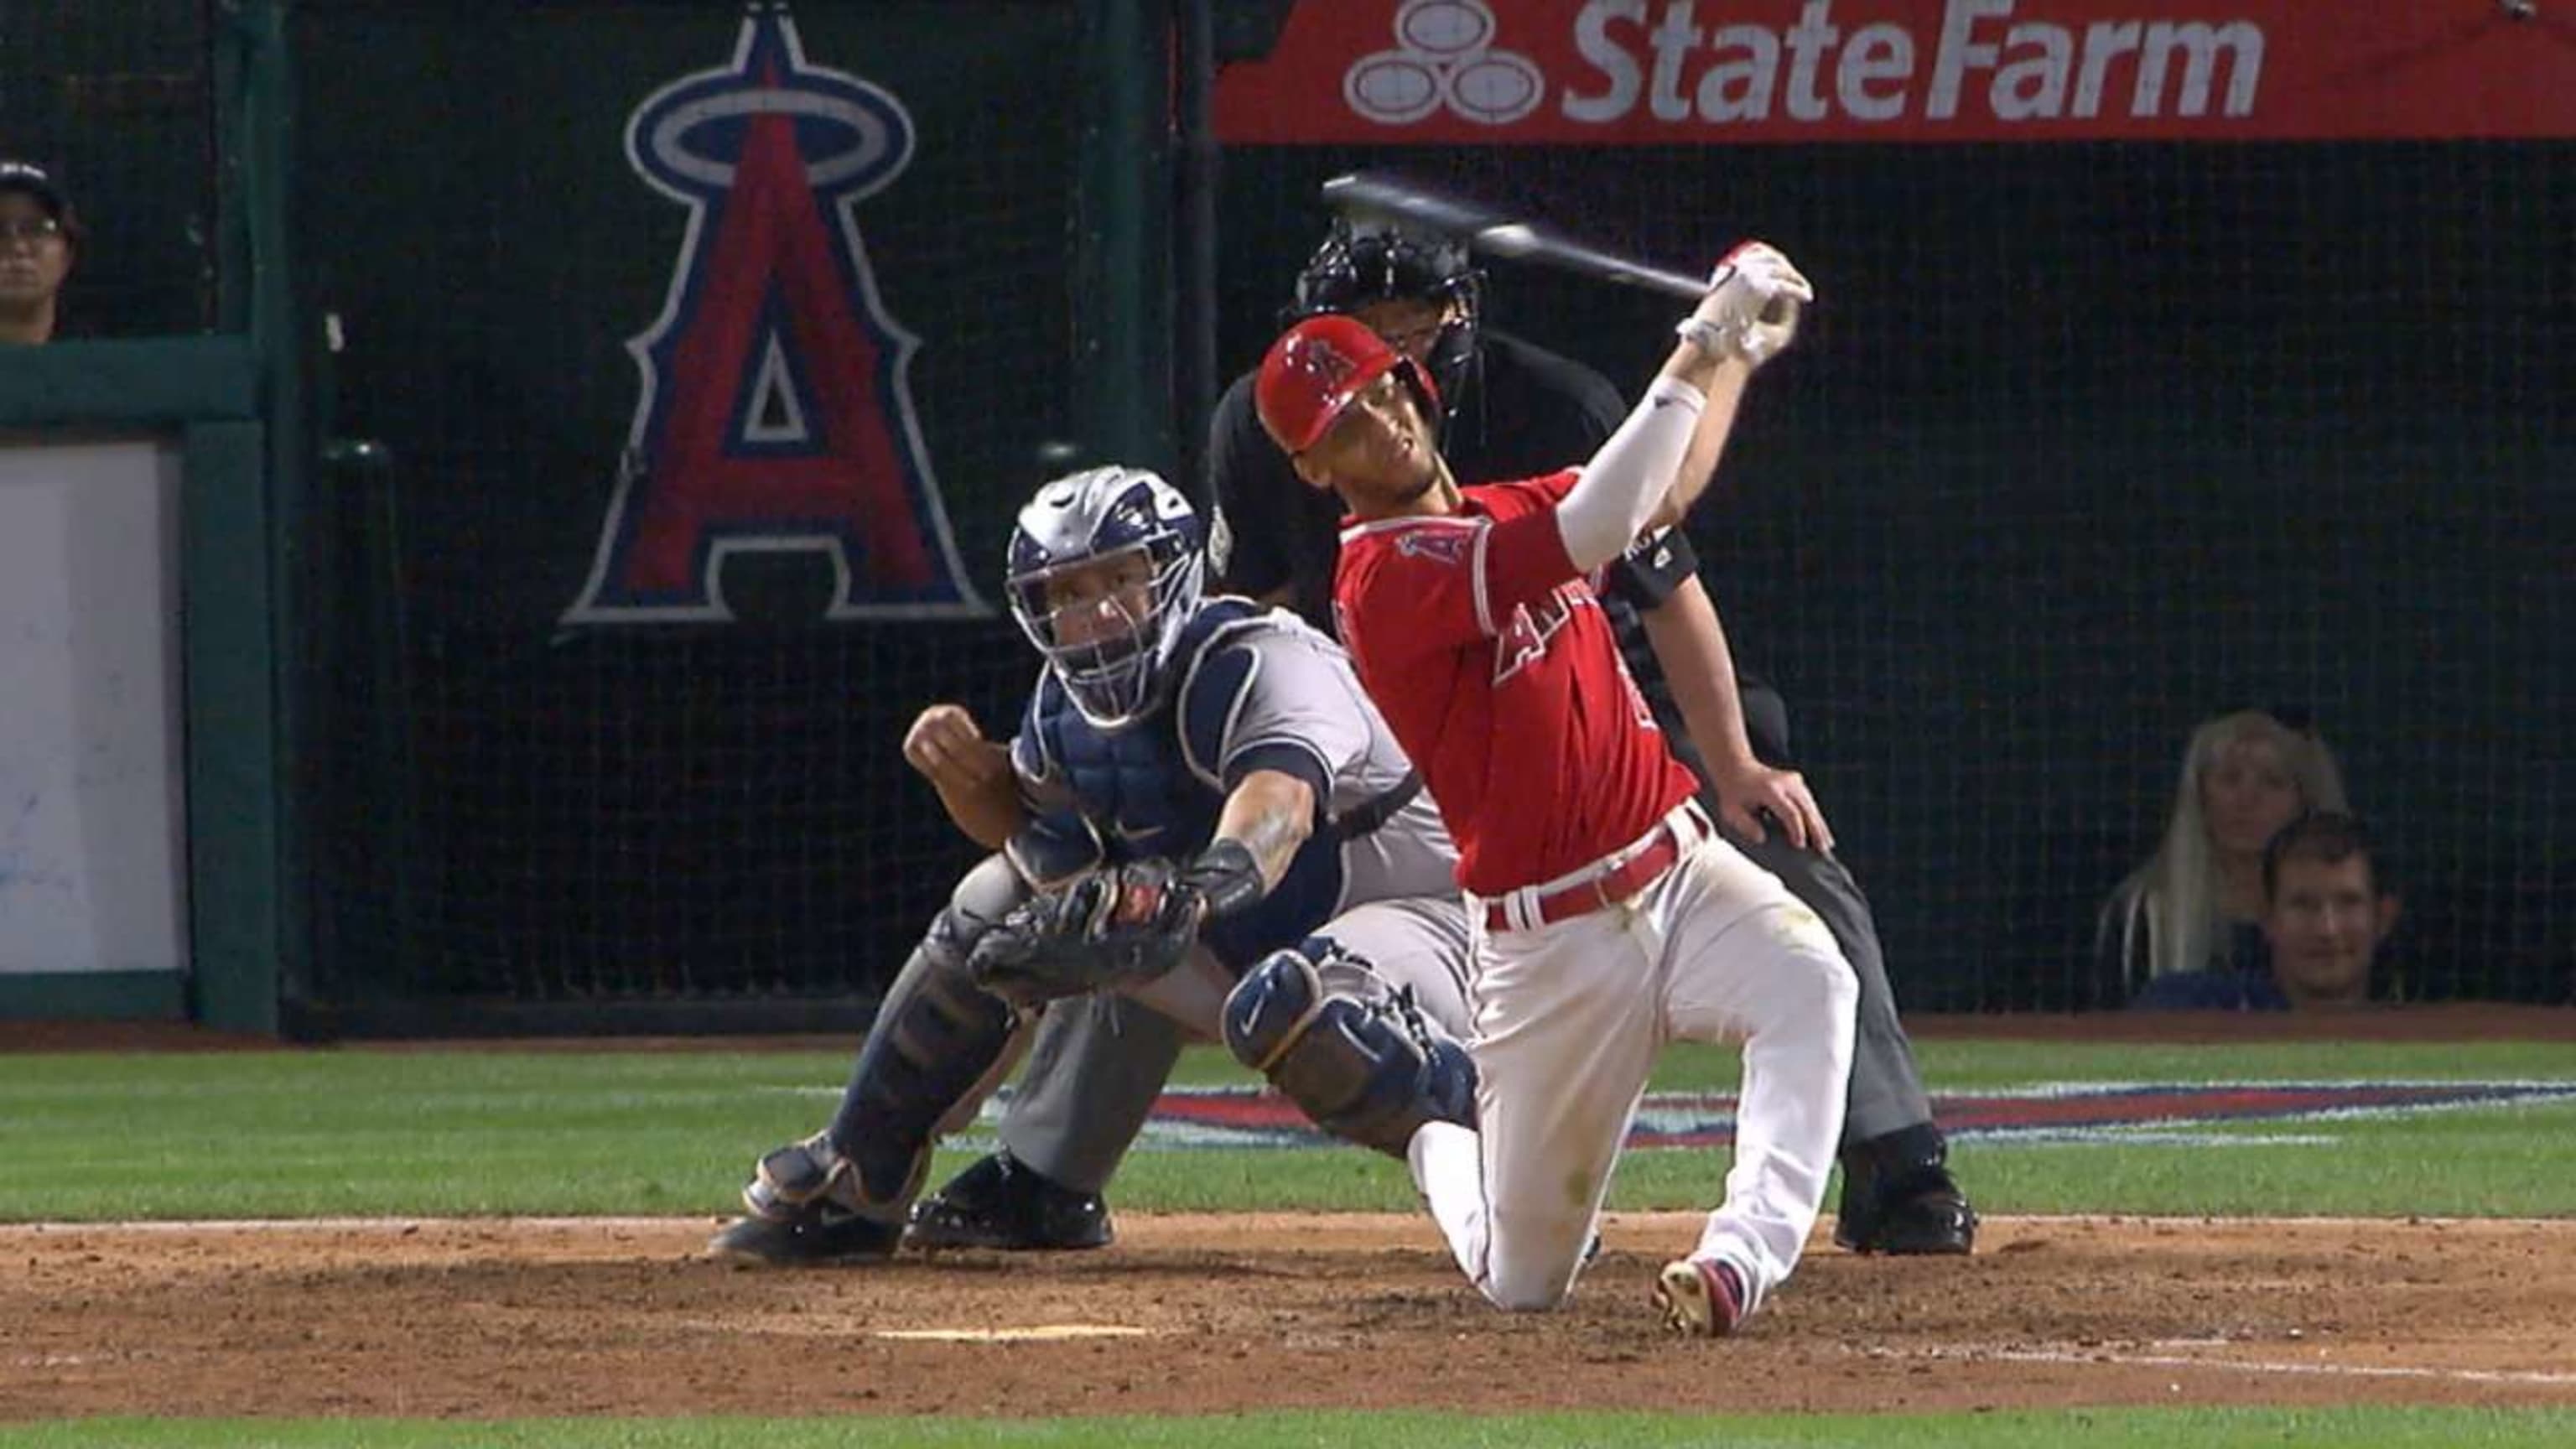 Andrelton Simmons took a page from Adrian Beltre's book, hitting a